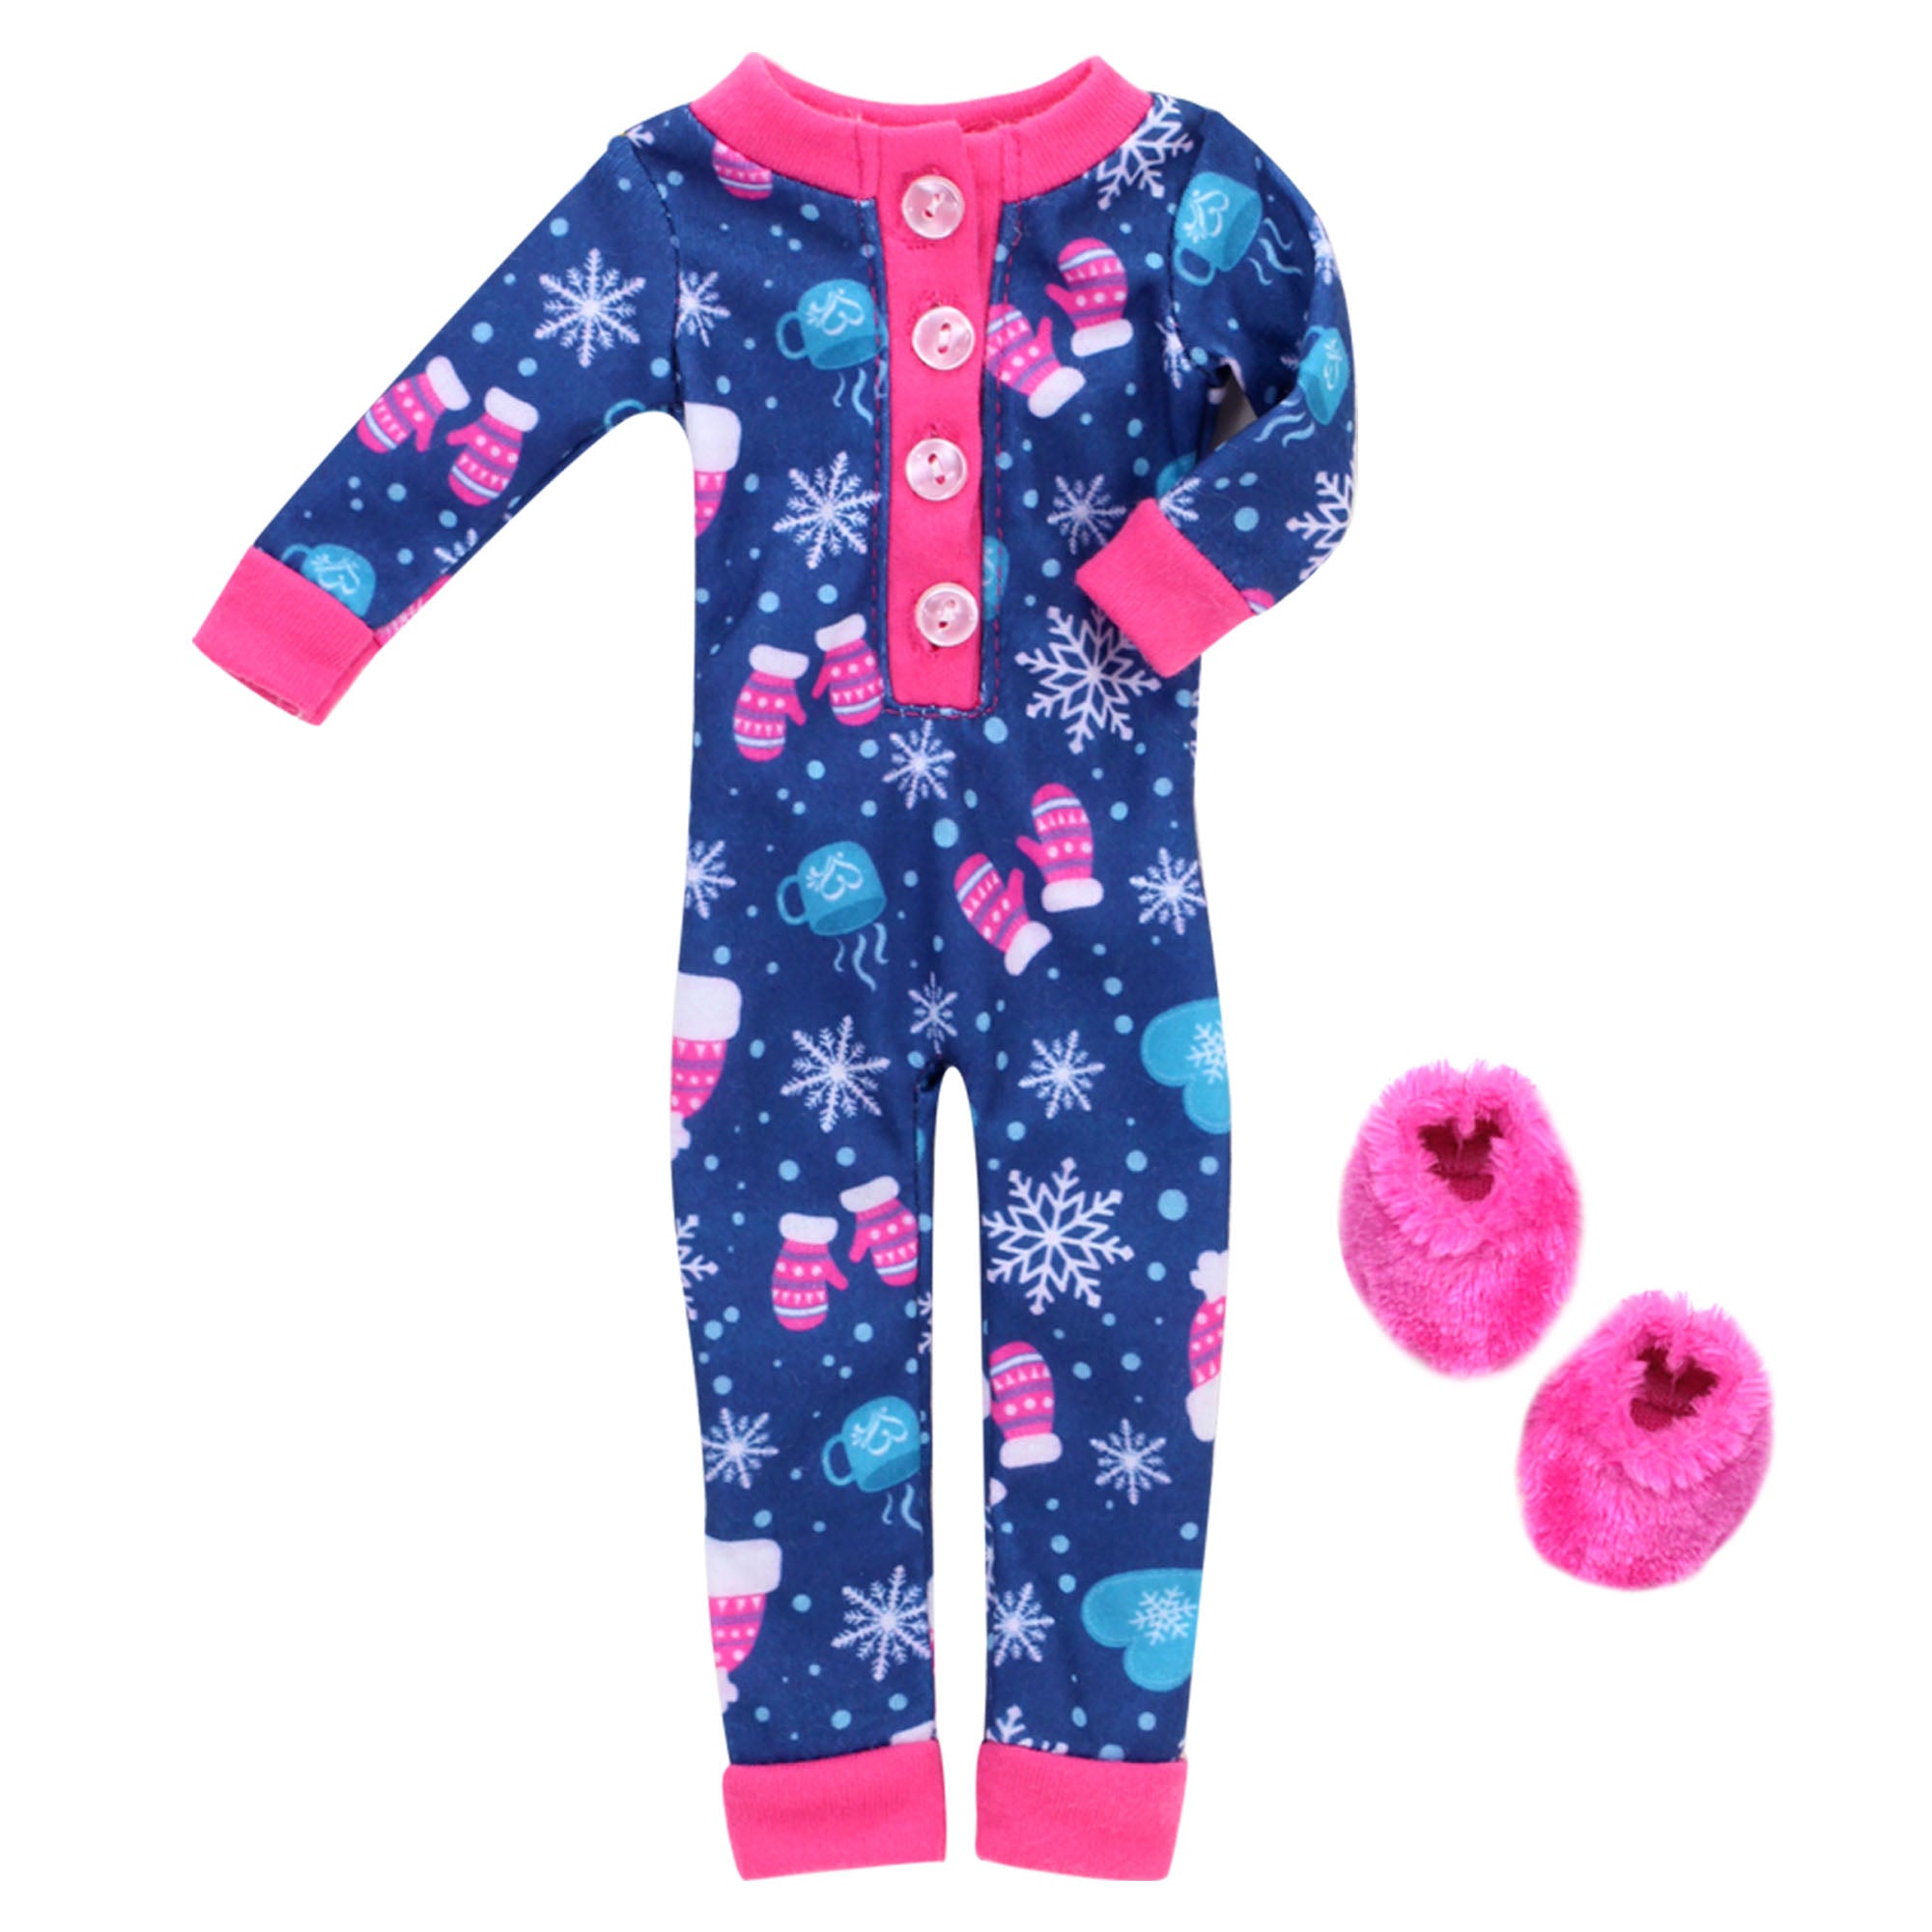 Sophia's One Piece Winter Pajamas and Slippers for 14.5" Dolls, Blue/Hot Pink